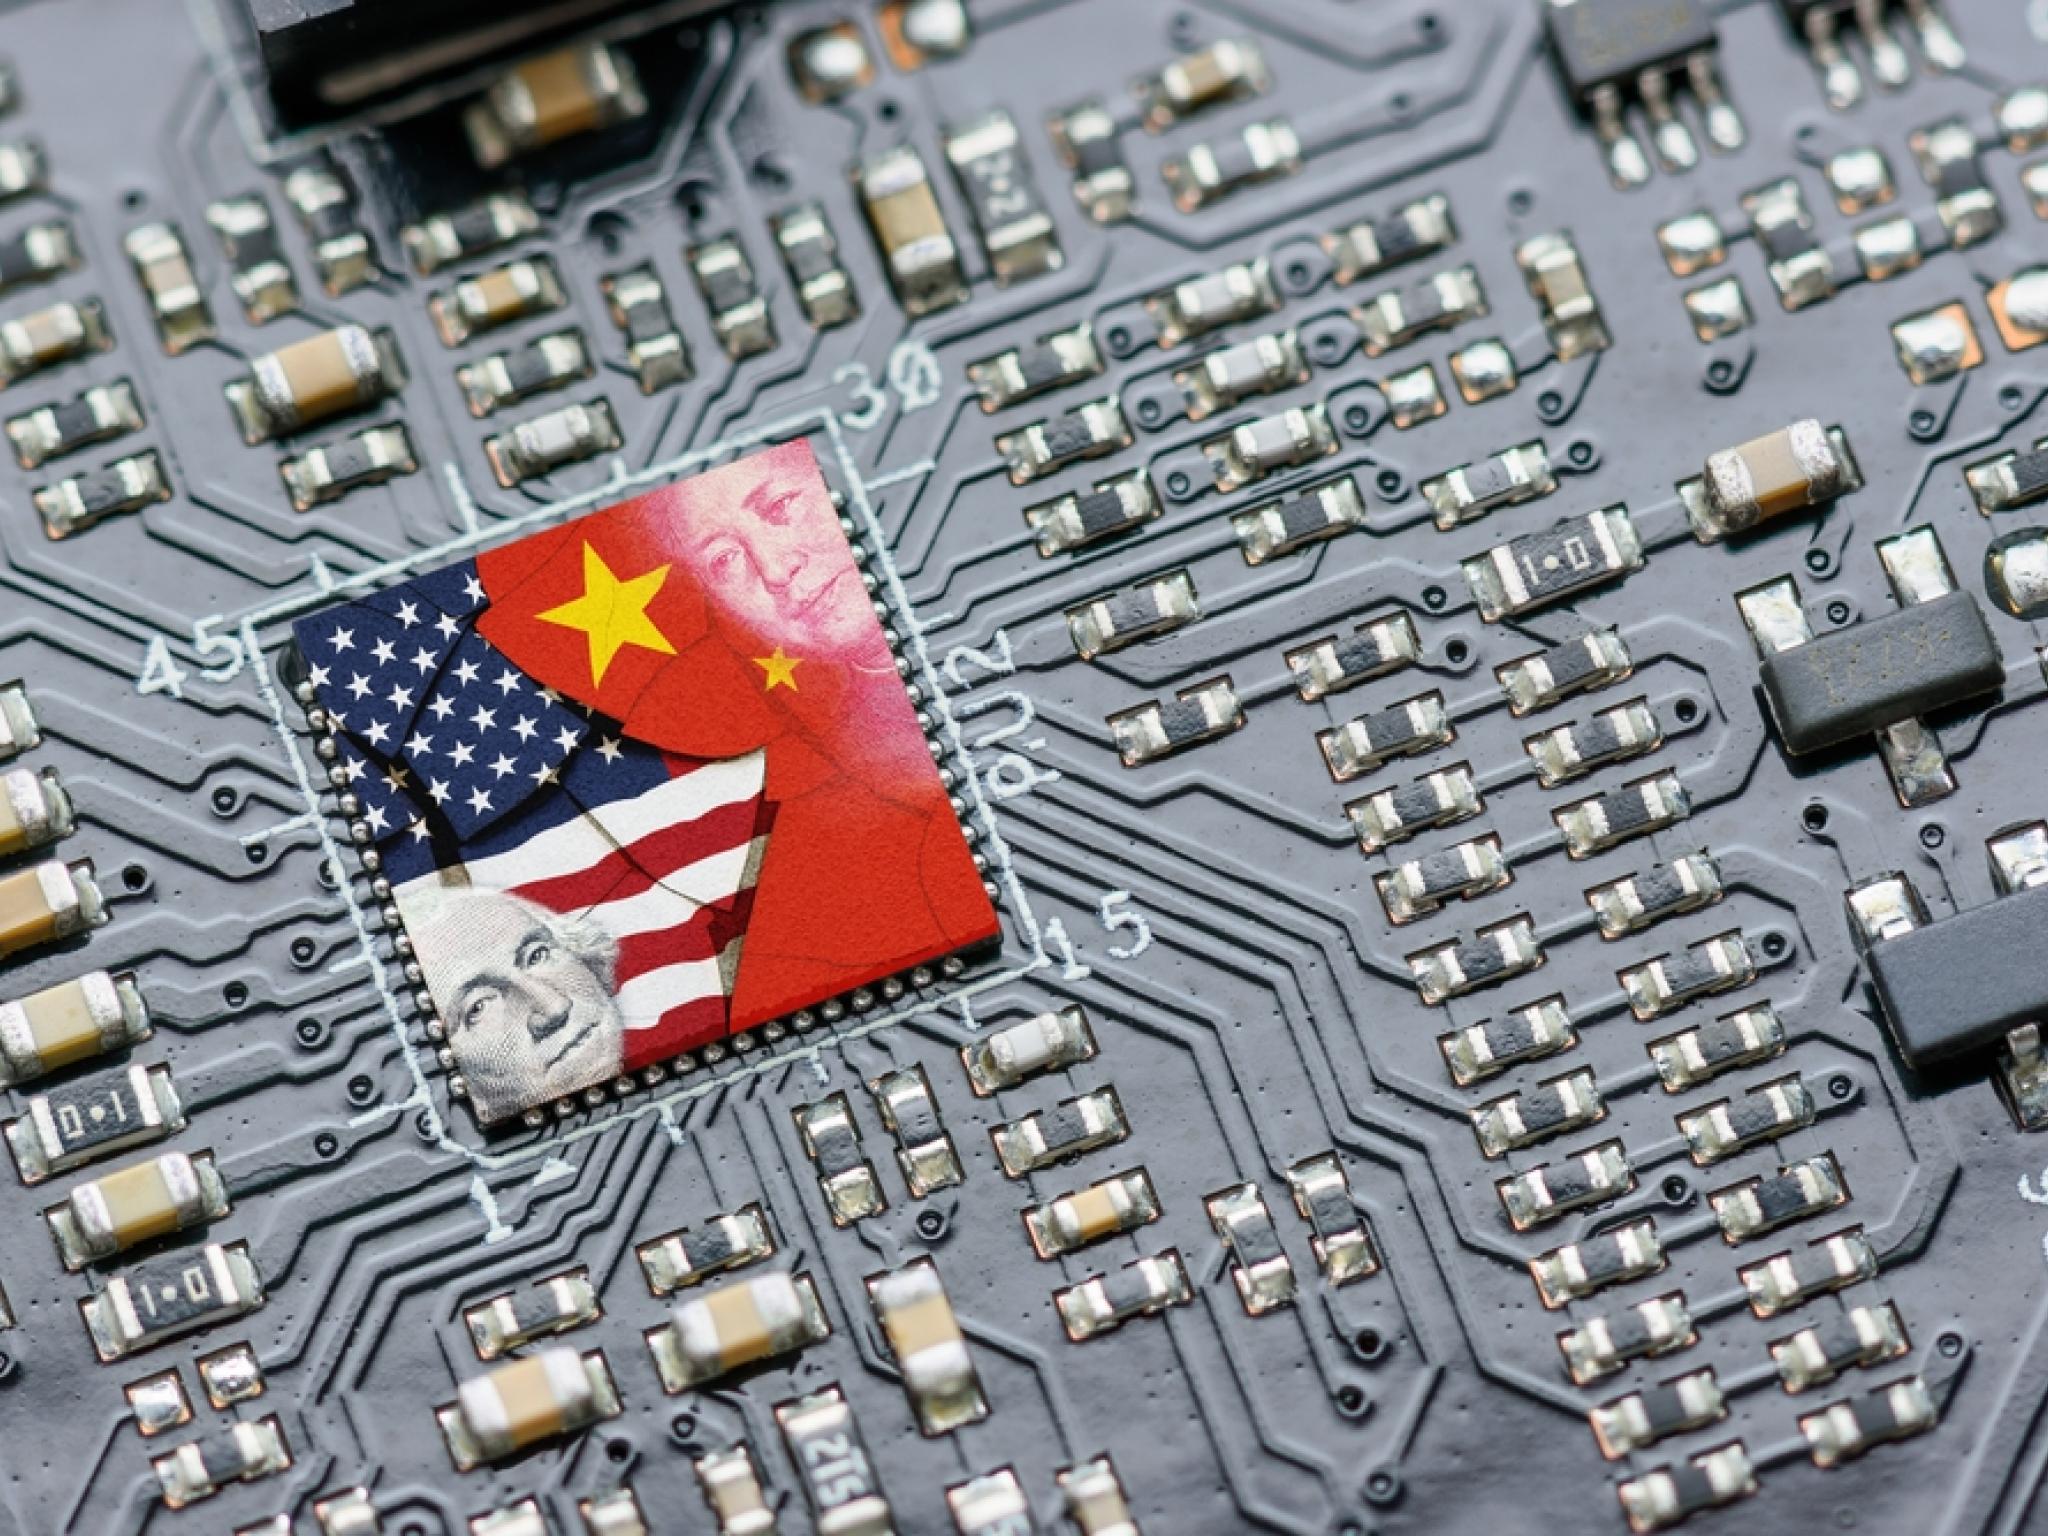  biden-mulls-new-restrictions-on-chinas-advanced-ai-chips-access-report 